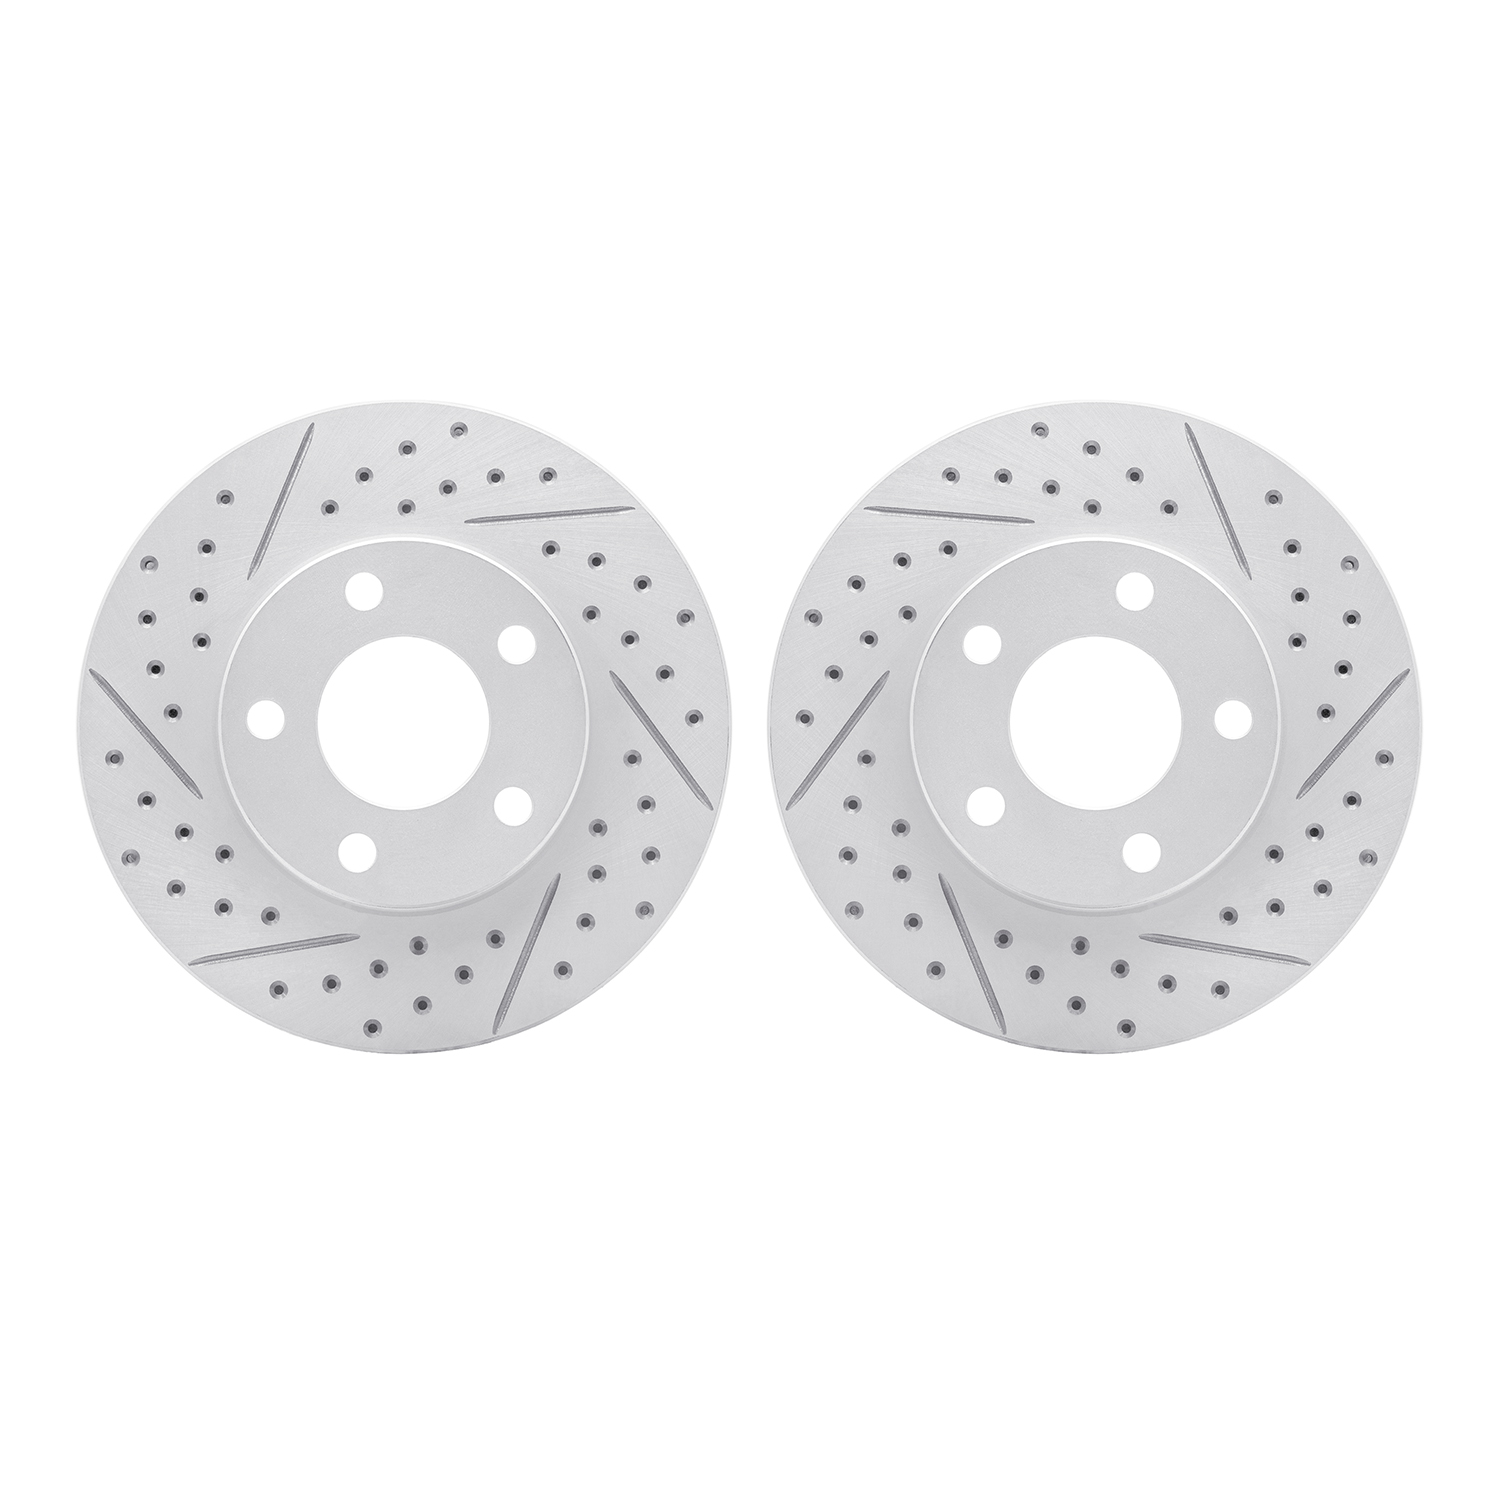 2002-54092 Geoperformance Drilled/Slotted Brake Rotors, 1994-2004 Ford/Lincoln/Mercury/Mazda, Position: Front